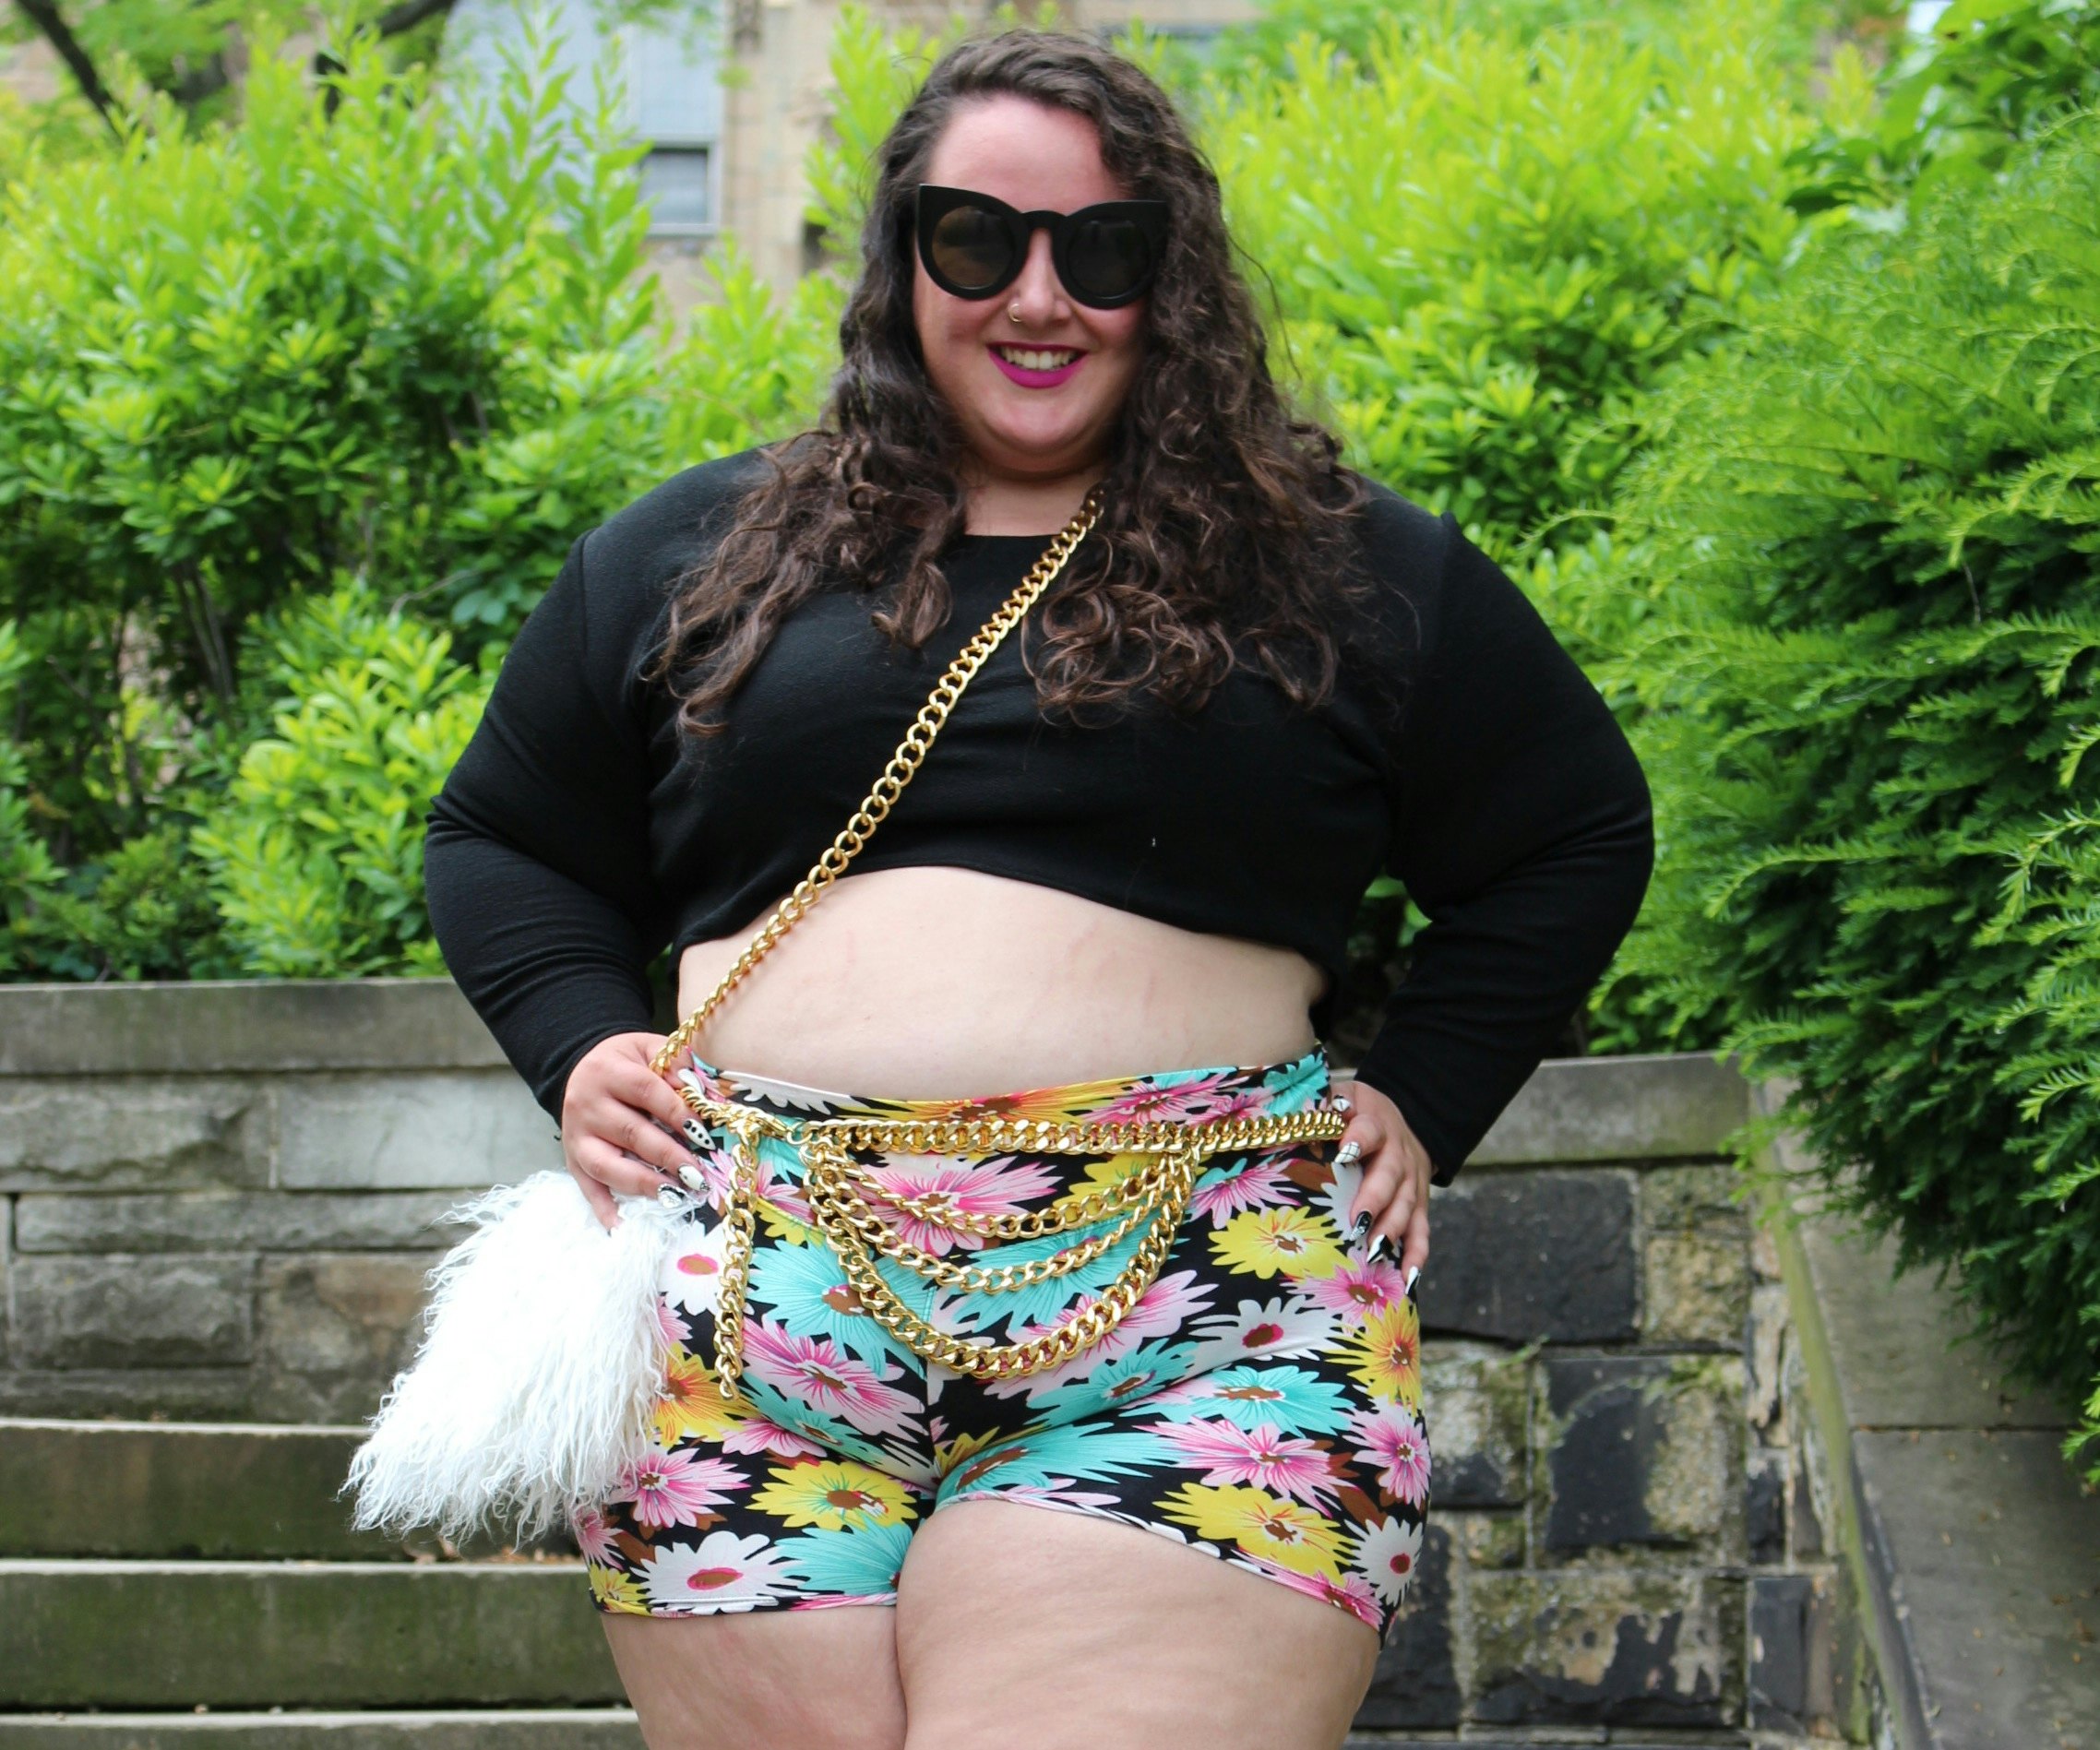 16 Plus Size Women In Short Shorts To 